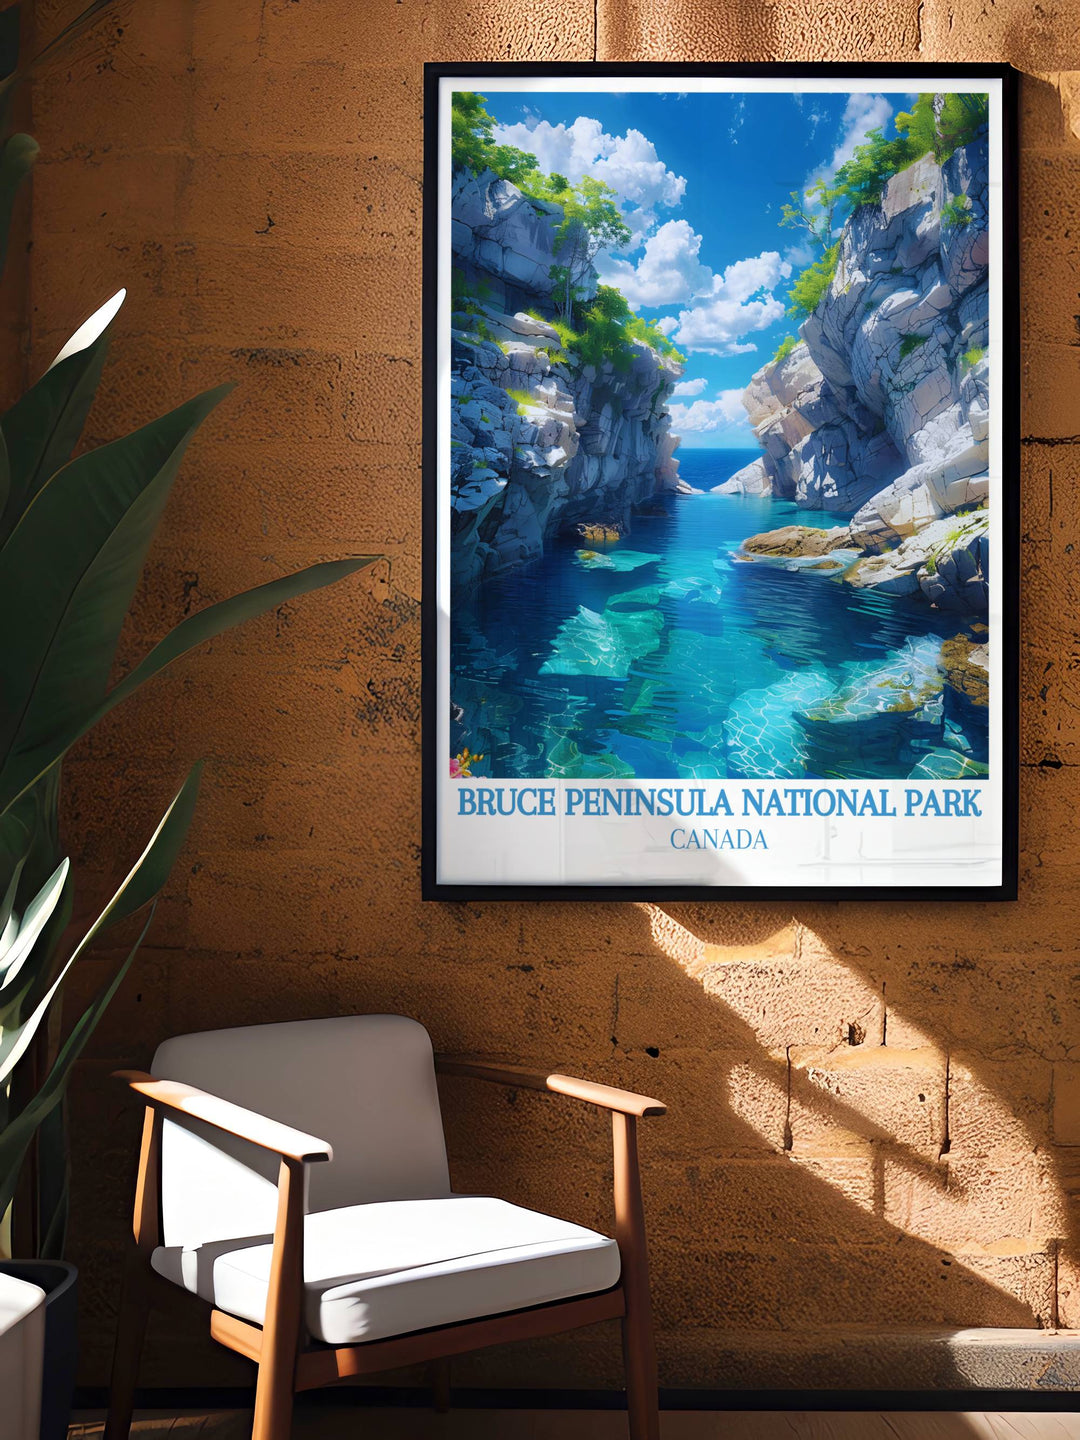 The Grotto Cottagecore Decor print adds a touch of nature inspired elegance to your home decor with its detailed portrayal of the grottos distinctive rock formations and peaceful surroundings